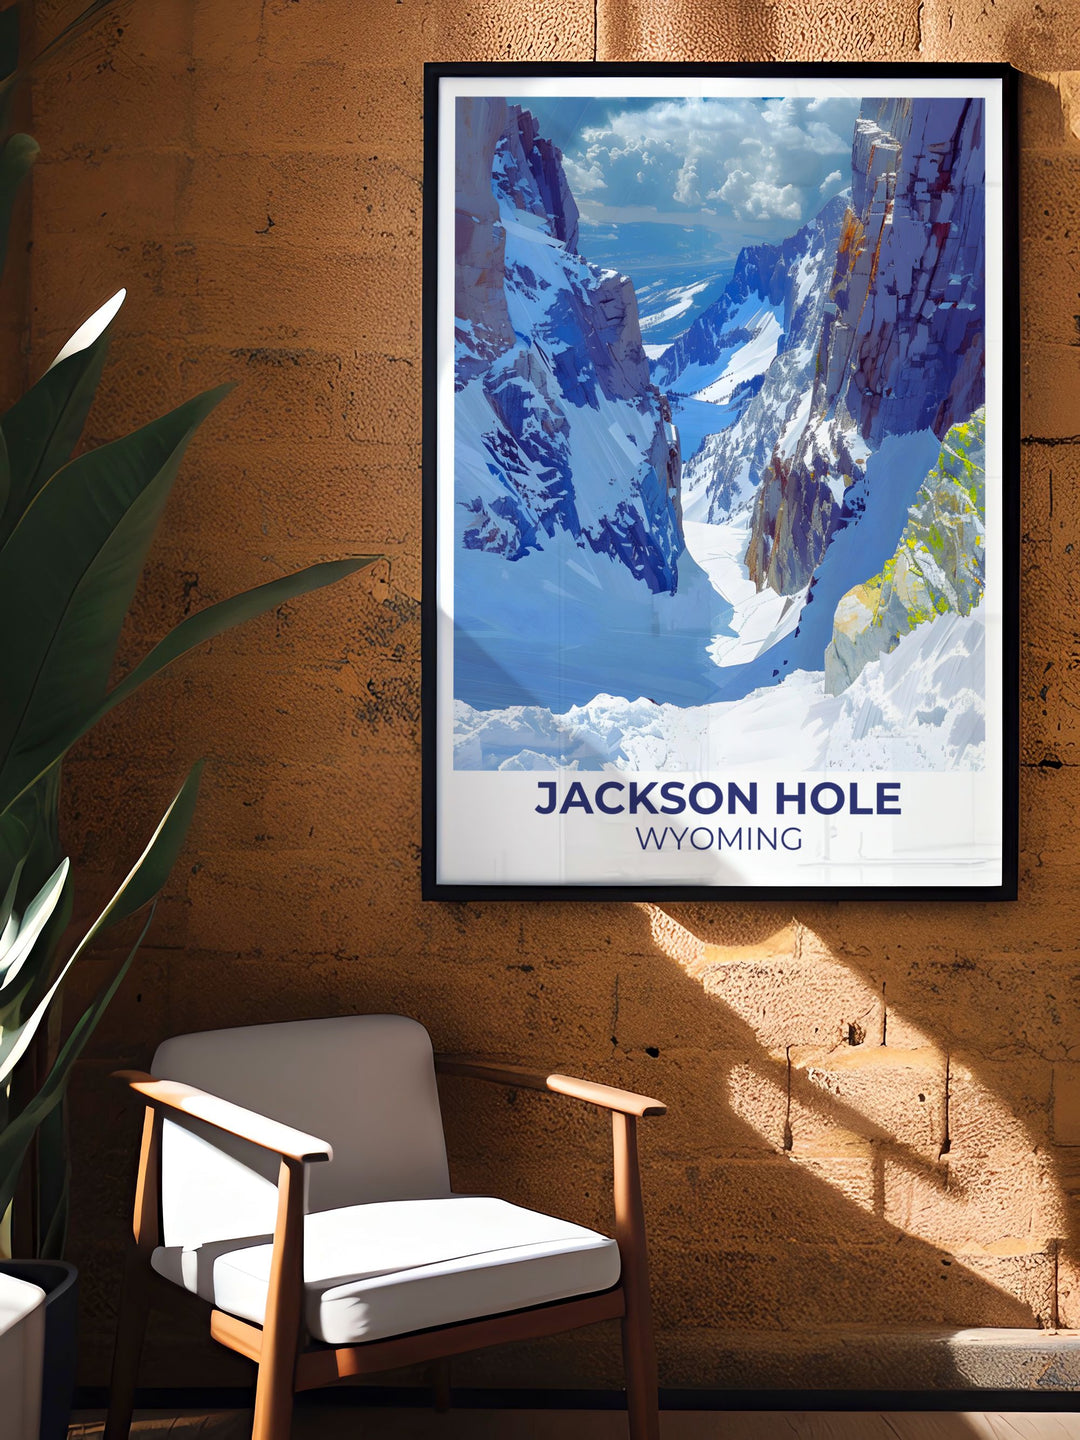 Jackson Hole artwork focusing on the iconic Snake River and its reflections, suitable for a striking office decor